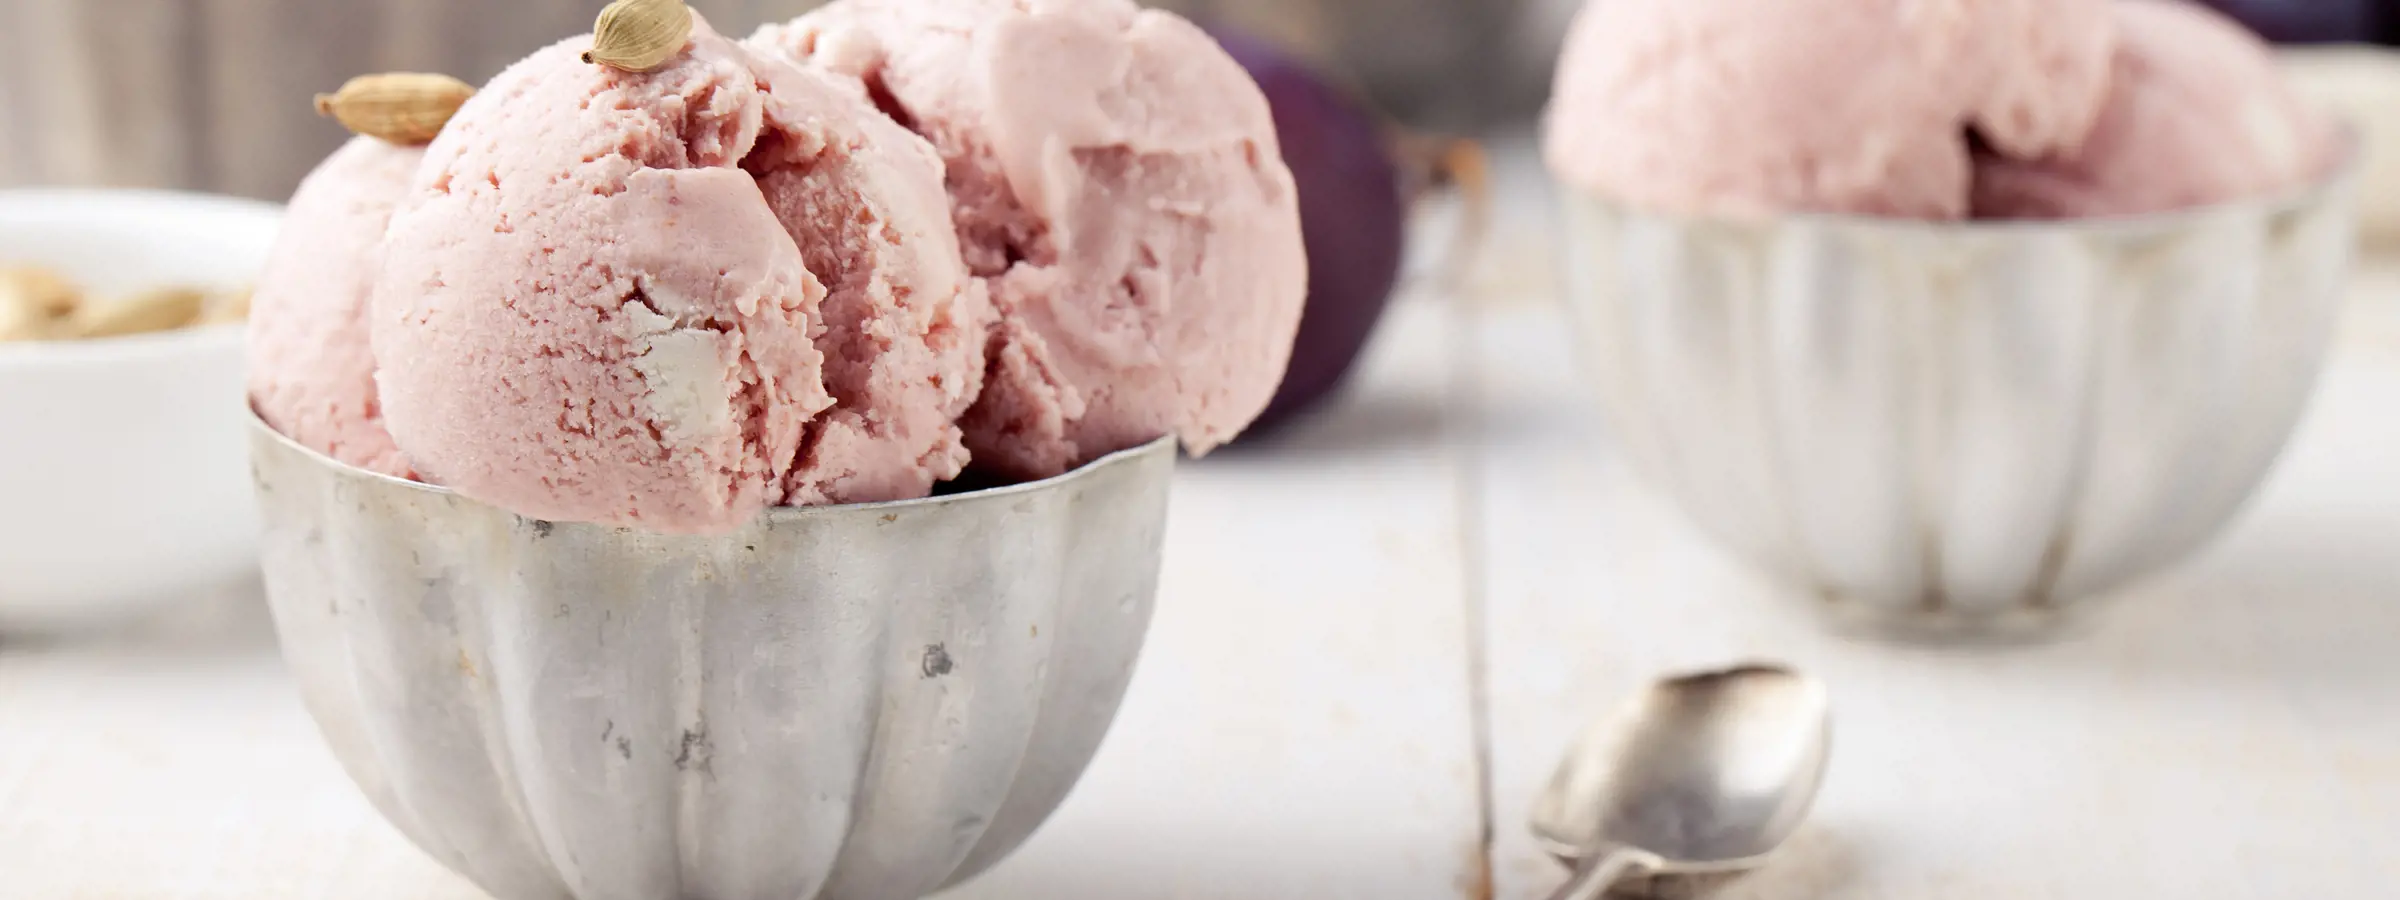 The use of Nutrilac milk proteins in ice cream keep costs under control